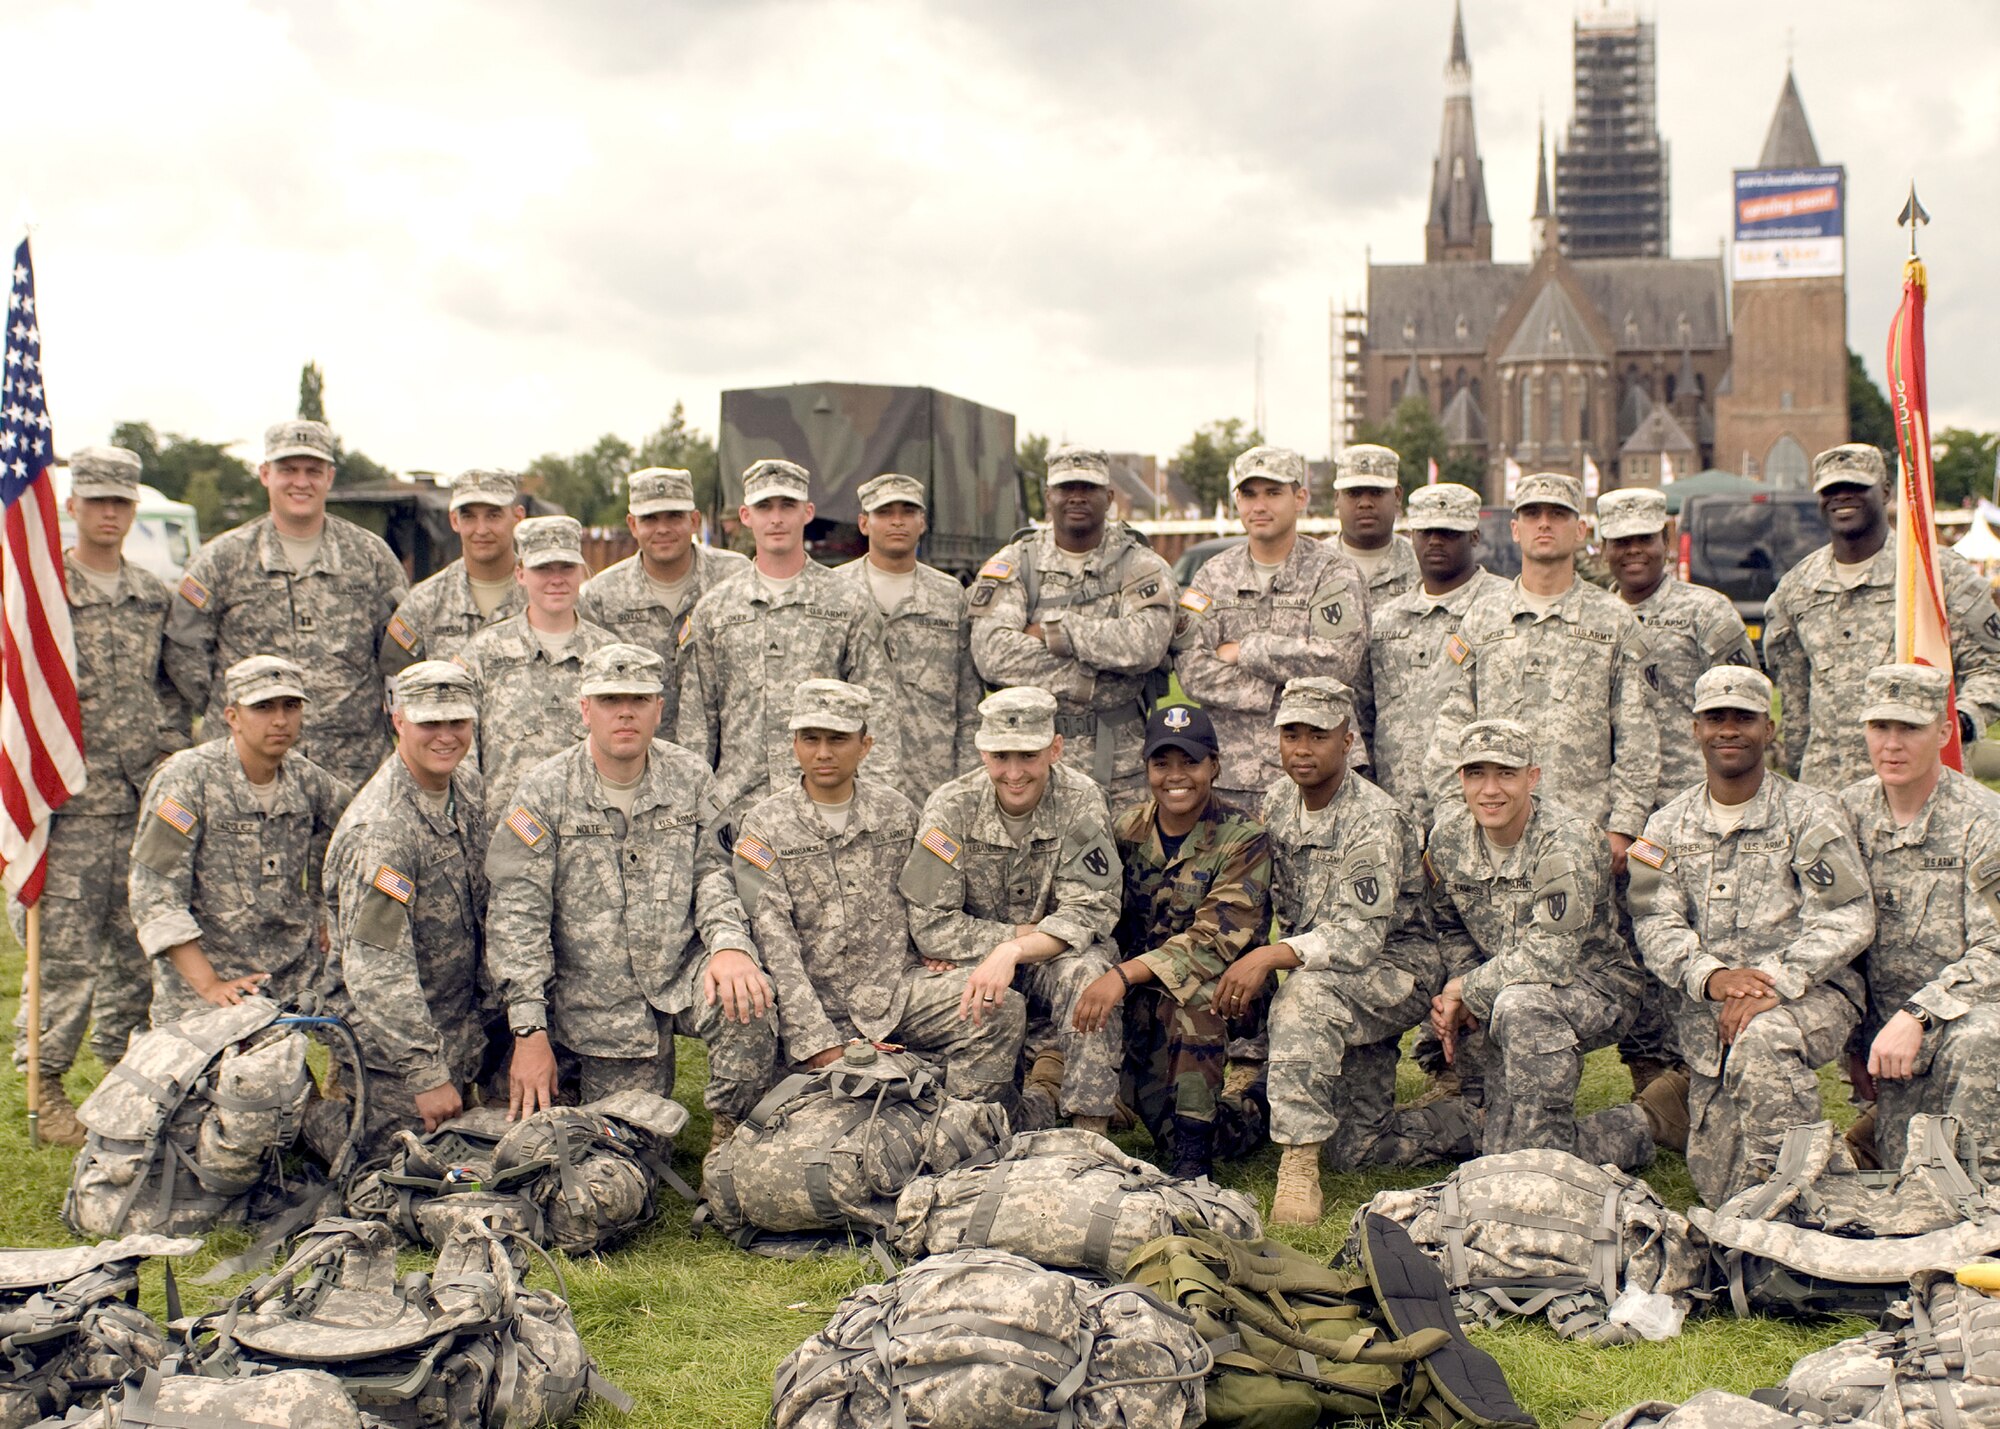 Senior Airman Saretta Morgan (BDUs), 86th Airlift Wing Legal Office parelegal, poses with her Army team mates after completing the International Four Day Marches Nijmegen in the Netherlands July 24. (Photo courtesy of the 21st Theater Sustainment Command)